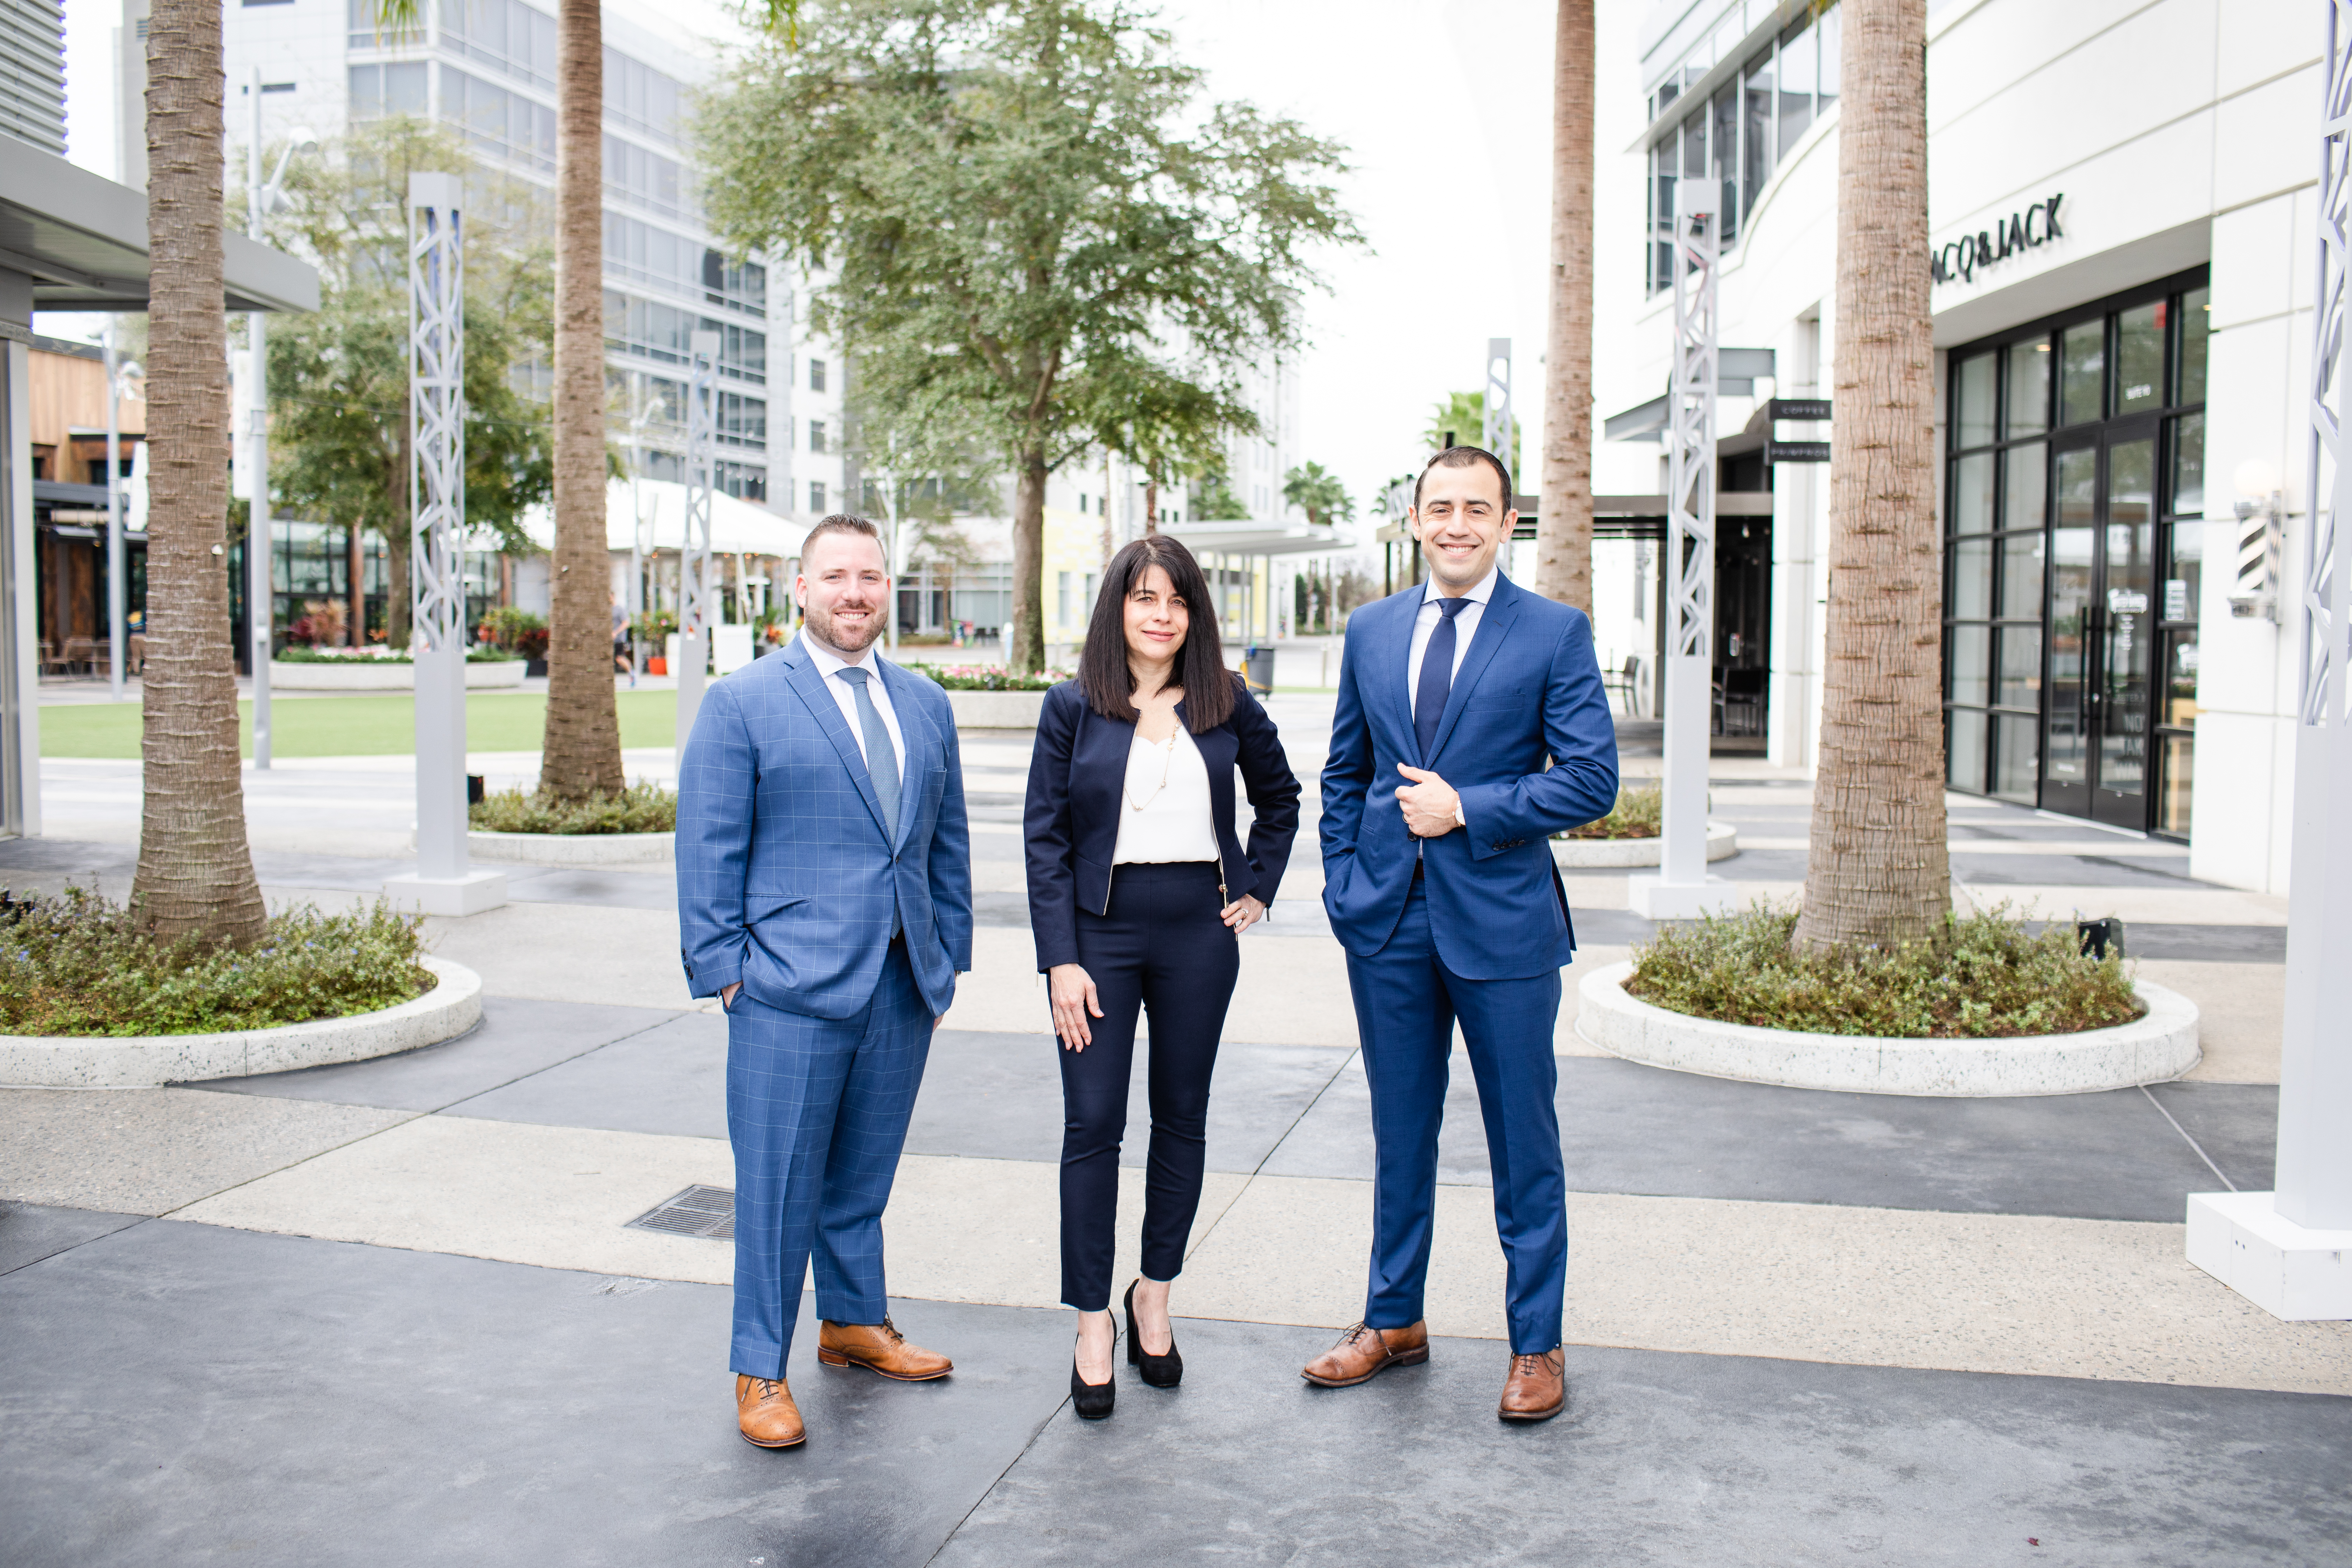 Two men and one woman dressed in business suits standing together in Lake Nona Towncenter plaza.